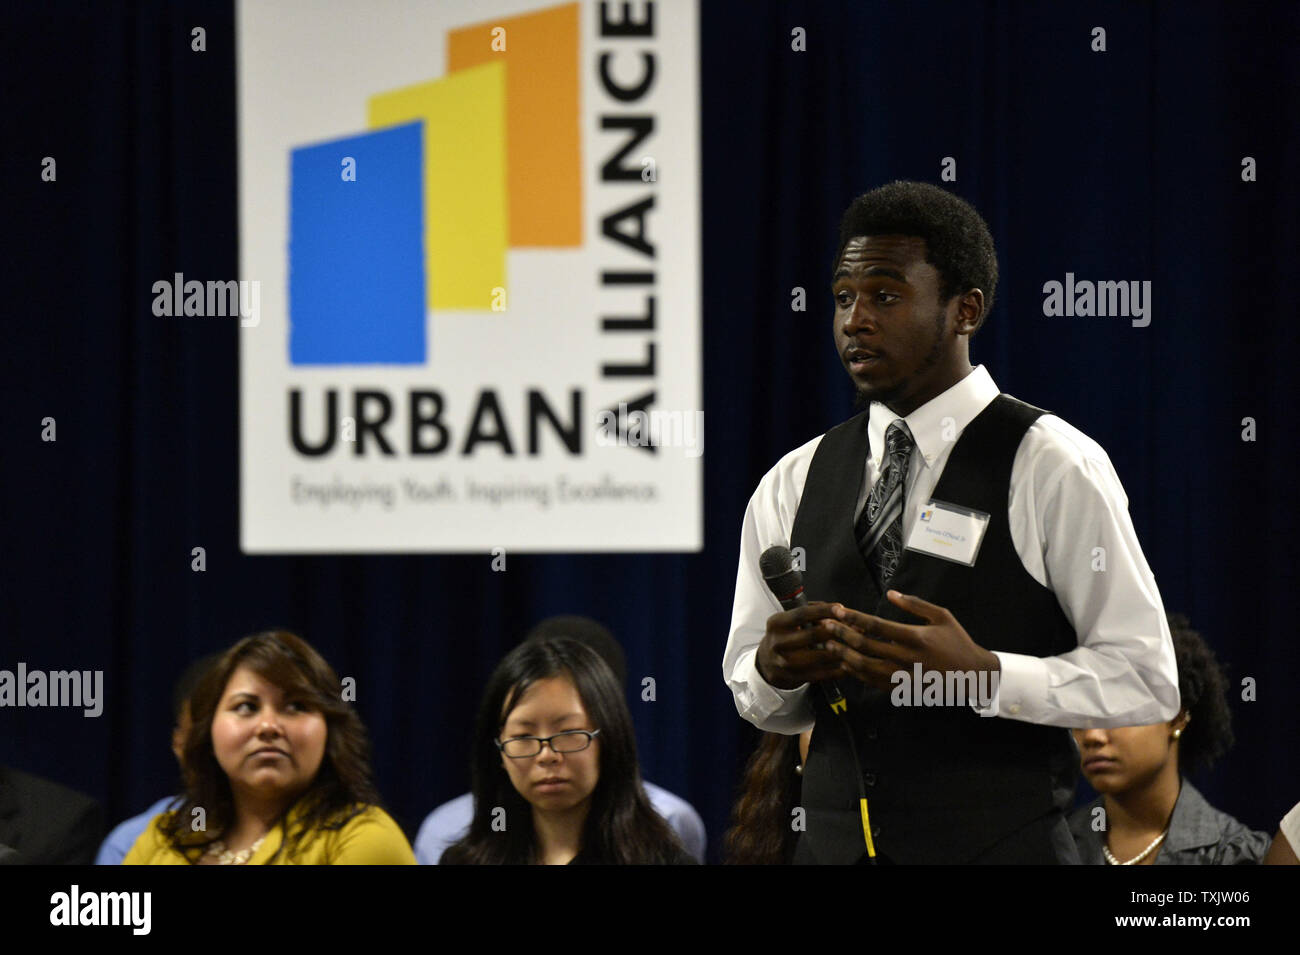 Steven O'Neal Jr., a student involved with Urban Alliance, tells First Lady Michelle Obama, Chicago Mayor Rahm Emanuel and Chicago First Lady Amy Rule about his experiences in the program at Columbia College in Chicago on July 18, 2013. With her visit, the First Lady seeks to bring attention to programs like Urban Alliance which is a year-long career education and employment program for underserved high school seniors that provides paid internships, formal training, and mentoring.     UPI/Brian Kersey Stock Photo